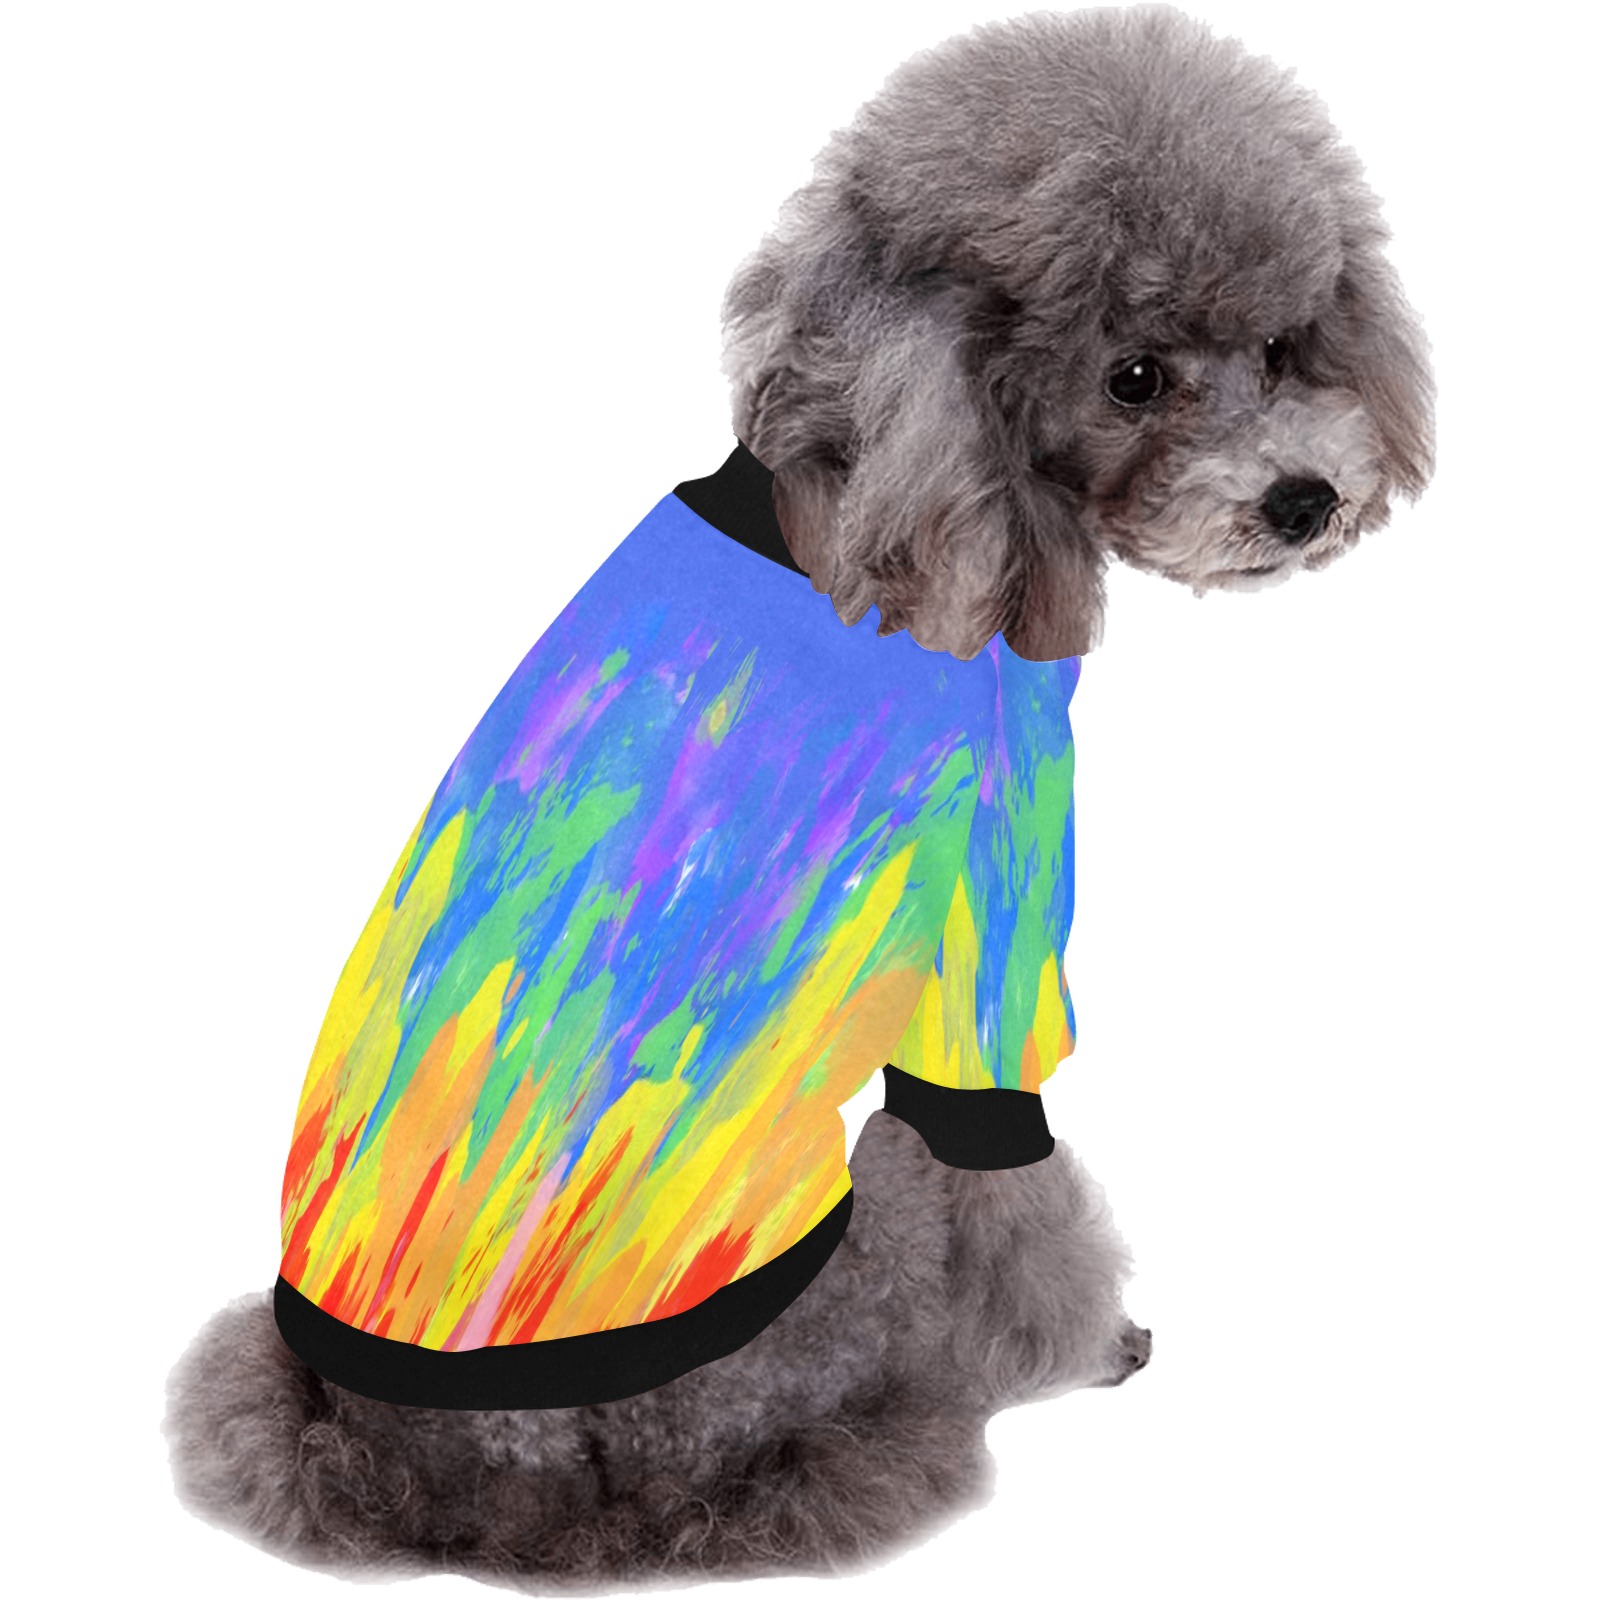 Flames Paint Abstract Classic Blue Pet Dog Round Neck Shirt